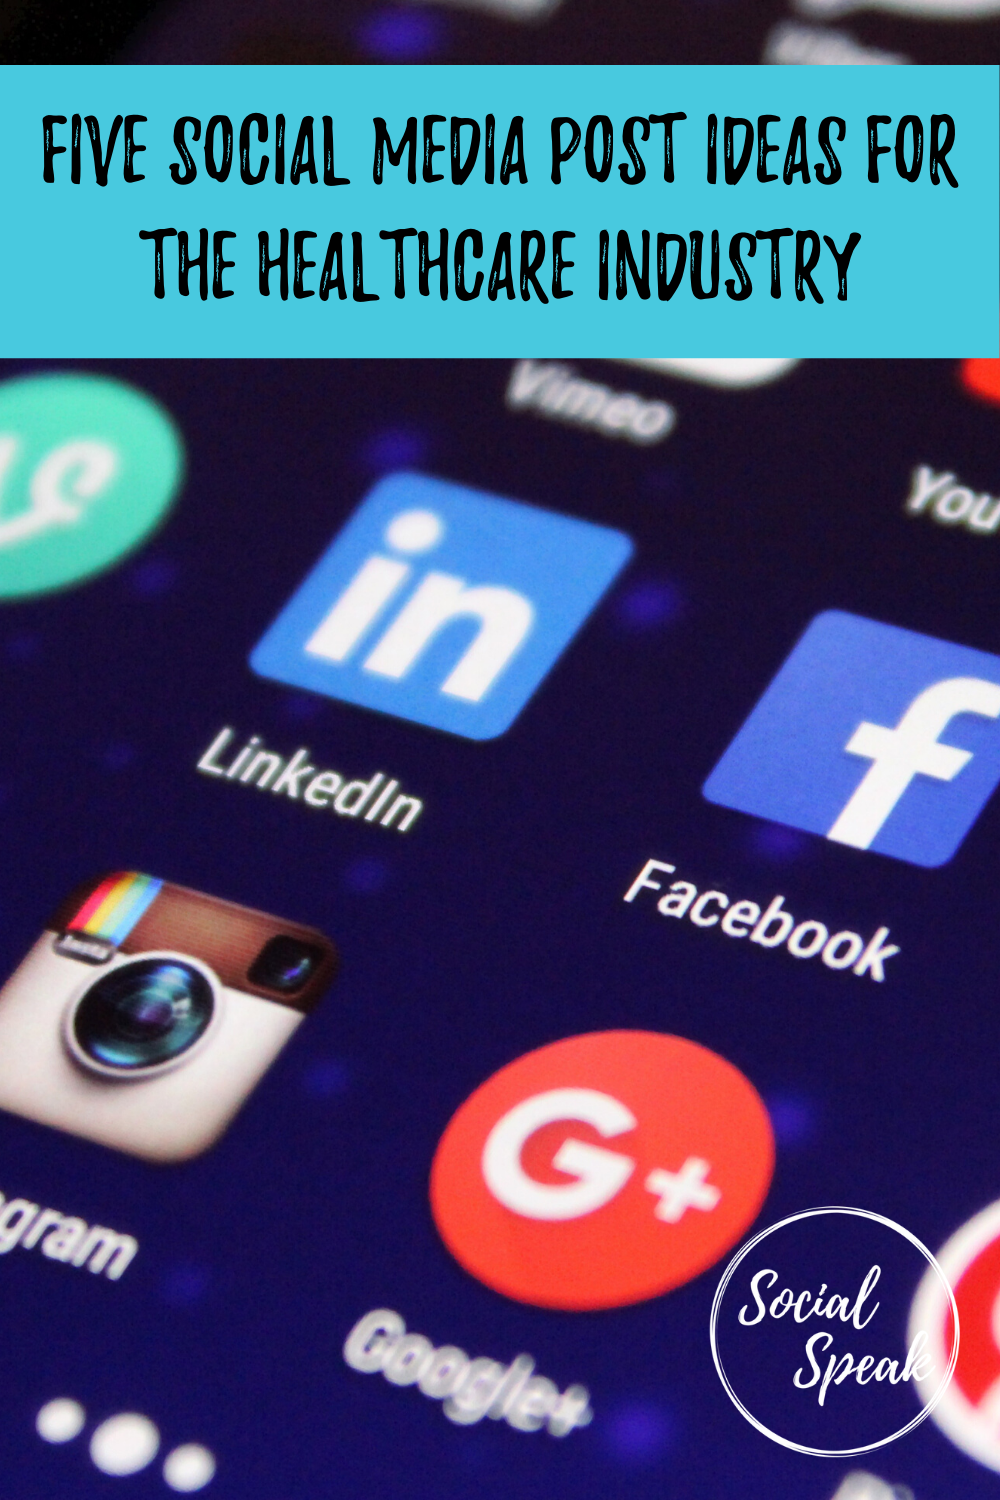 Five Social Media Post Ideas for the Healthcare Industry